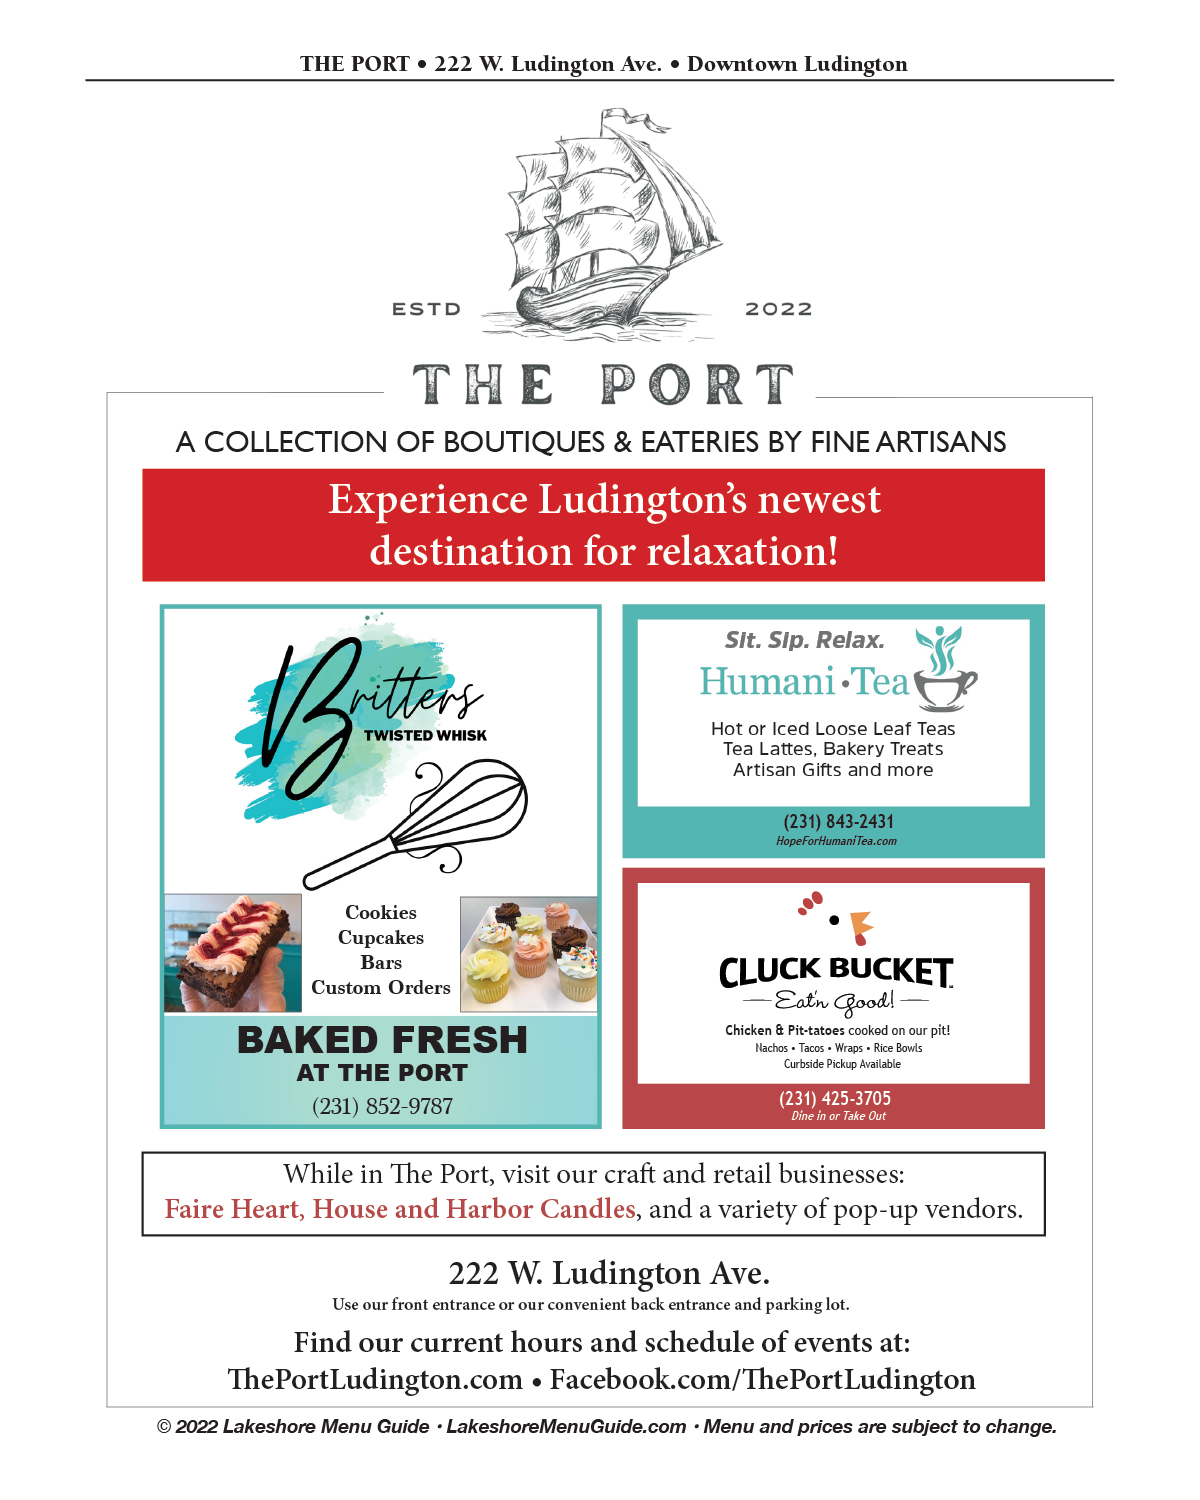 Menu for The Port in downtown Ludington from the Lakeshore Menu Guide